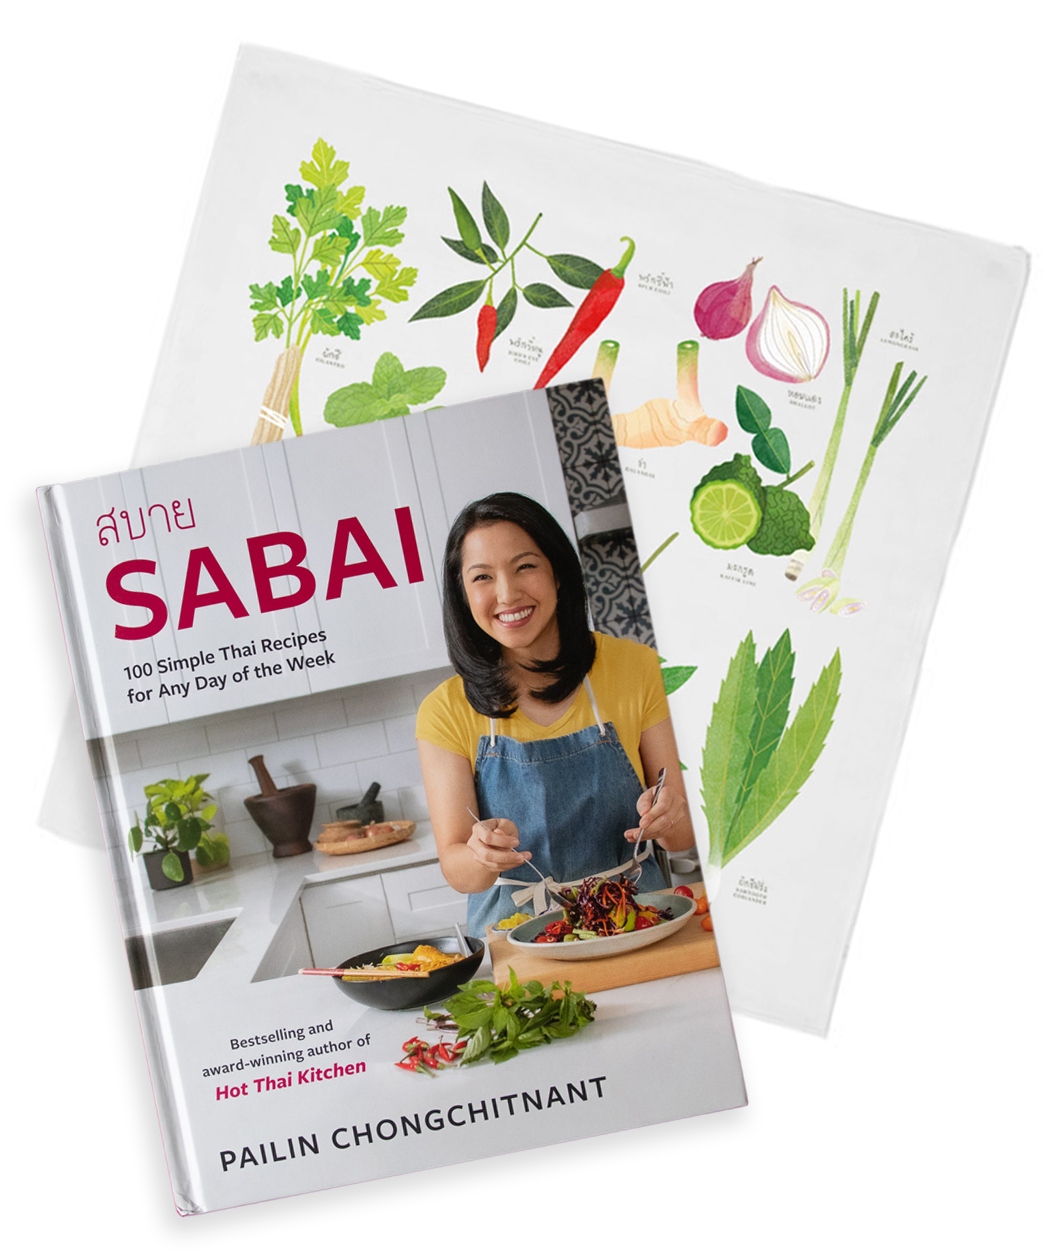 A cookbook title "Sabai" by Pailin Chongchitnant from Hot Thai Kitchen. The cover is Pailin in a kitchen tossing a meal on a plate. Behind the book is a tea towel with colorful illustrations of Thai herbs. 